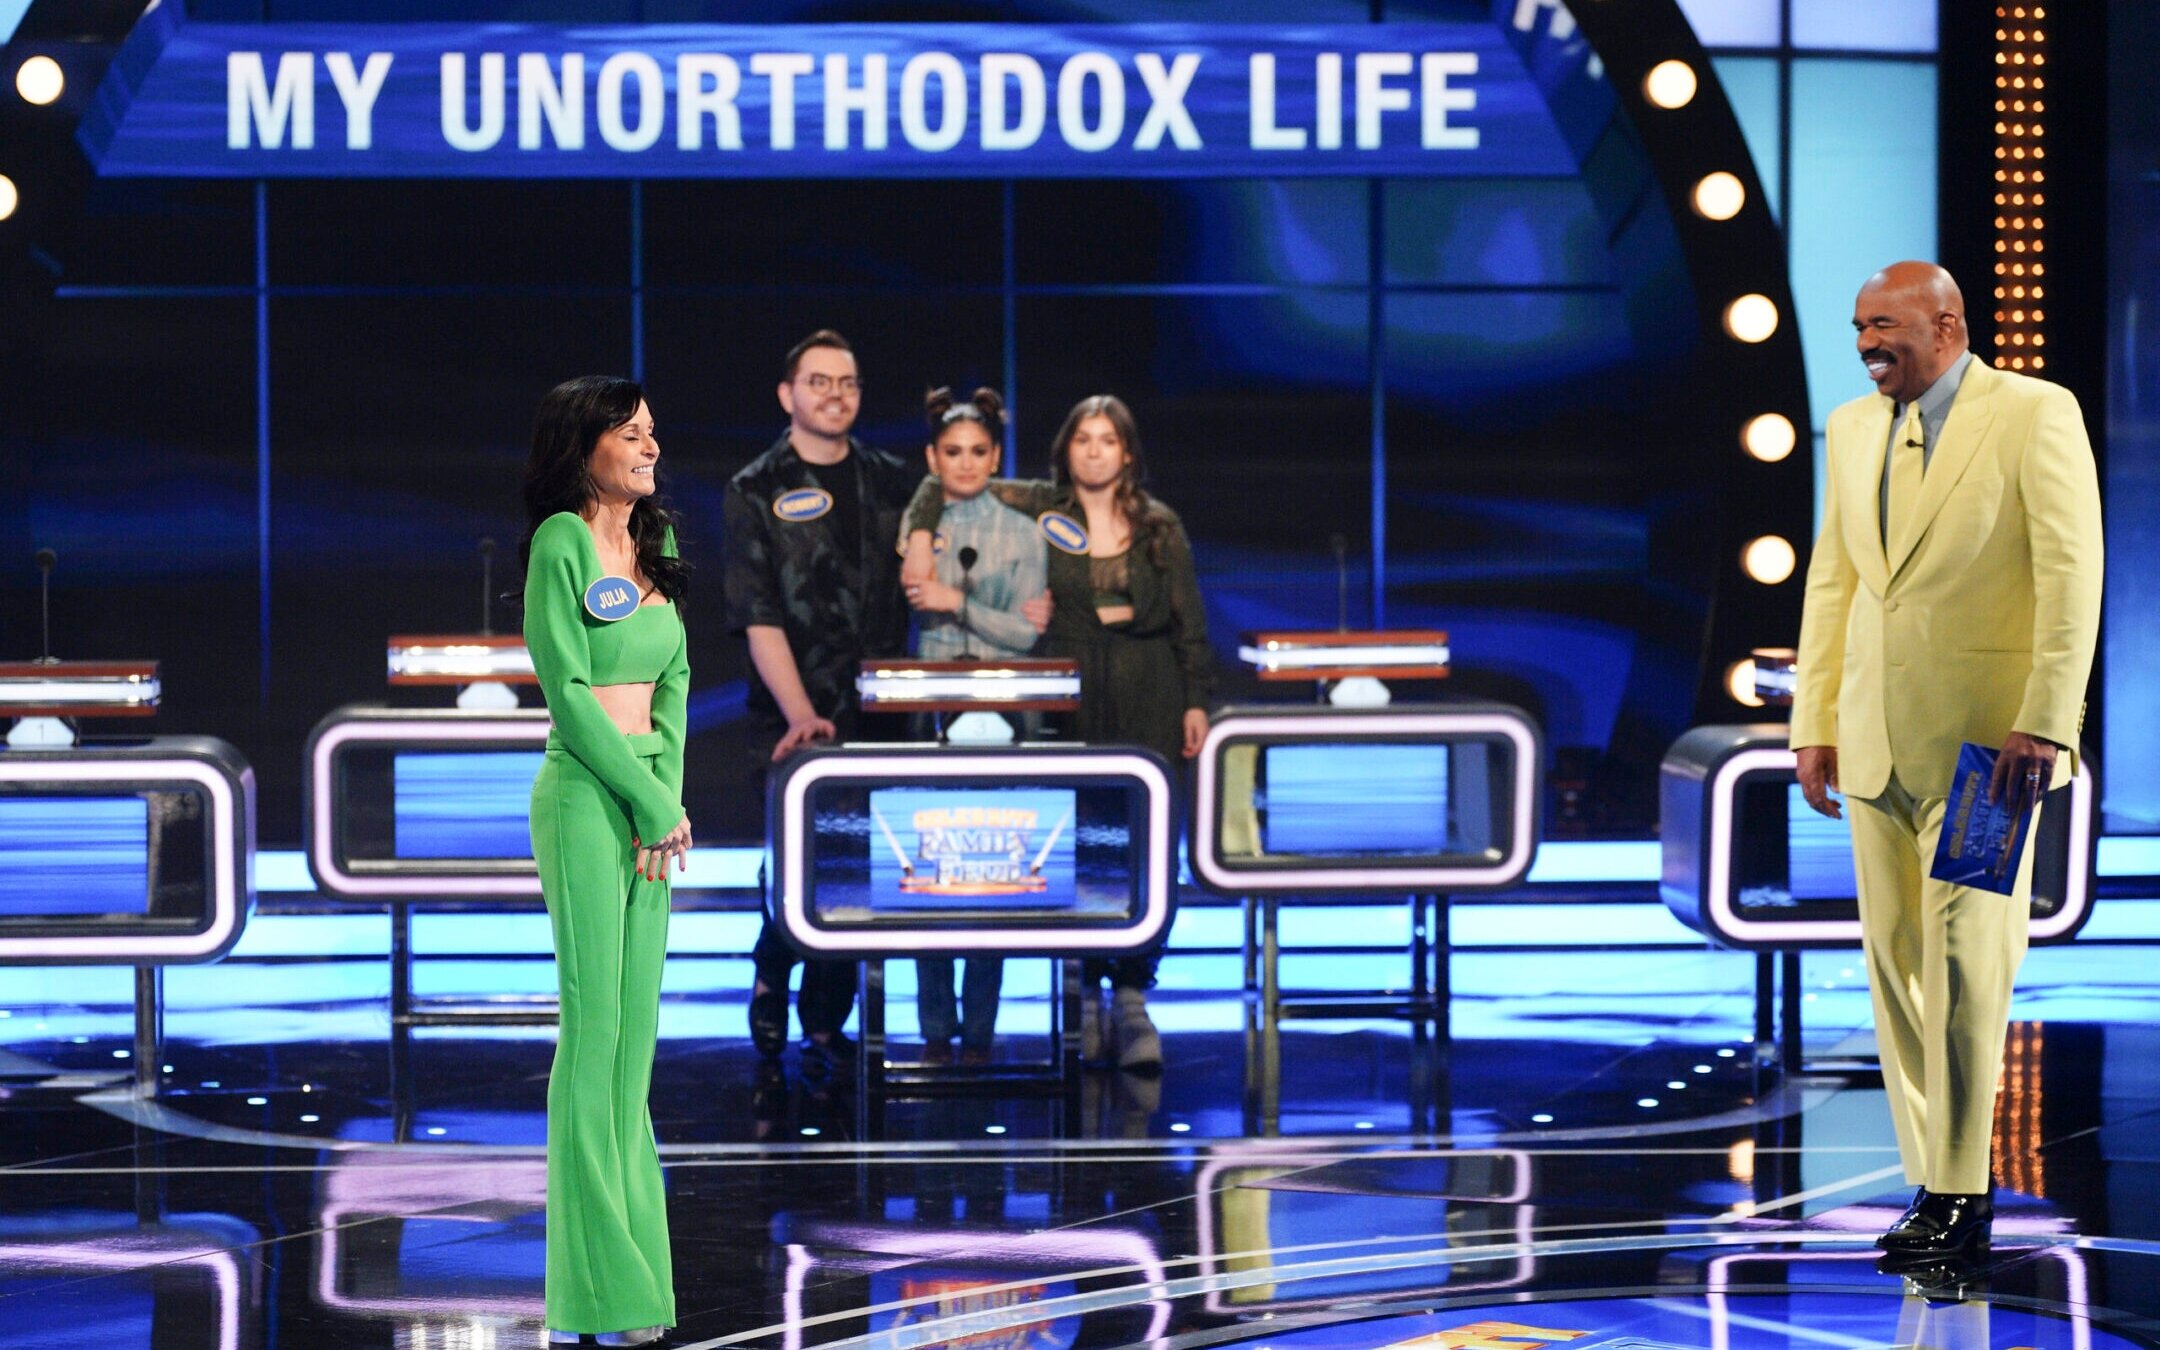 Julia Haart and her family compete on “Celebrity Family Feud,” hosted by comedian Steve Harvey, Aug. 14, 2022. (ABC/Christopher Willard)